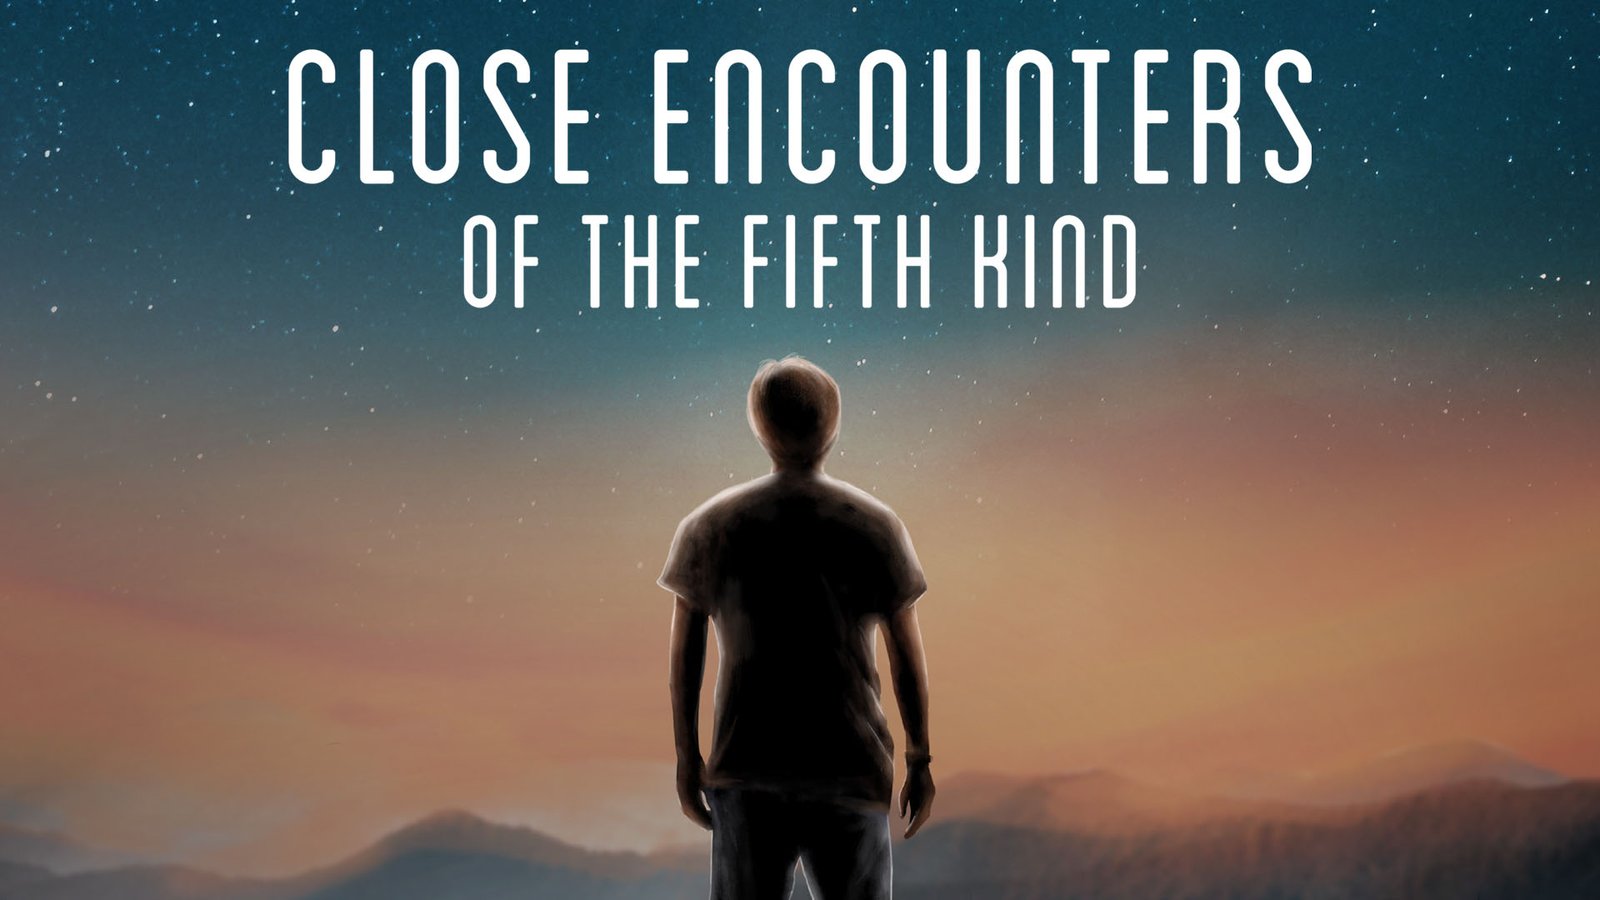 Close Encounters of the Fifth Kind: Contact Has Begun